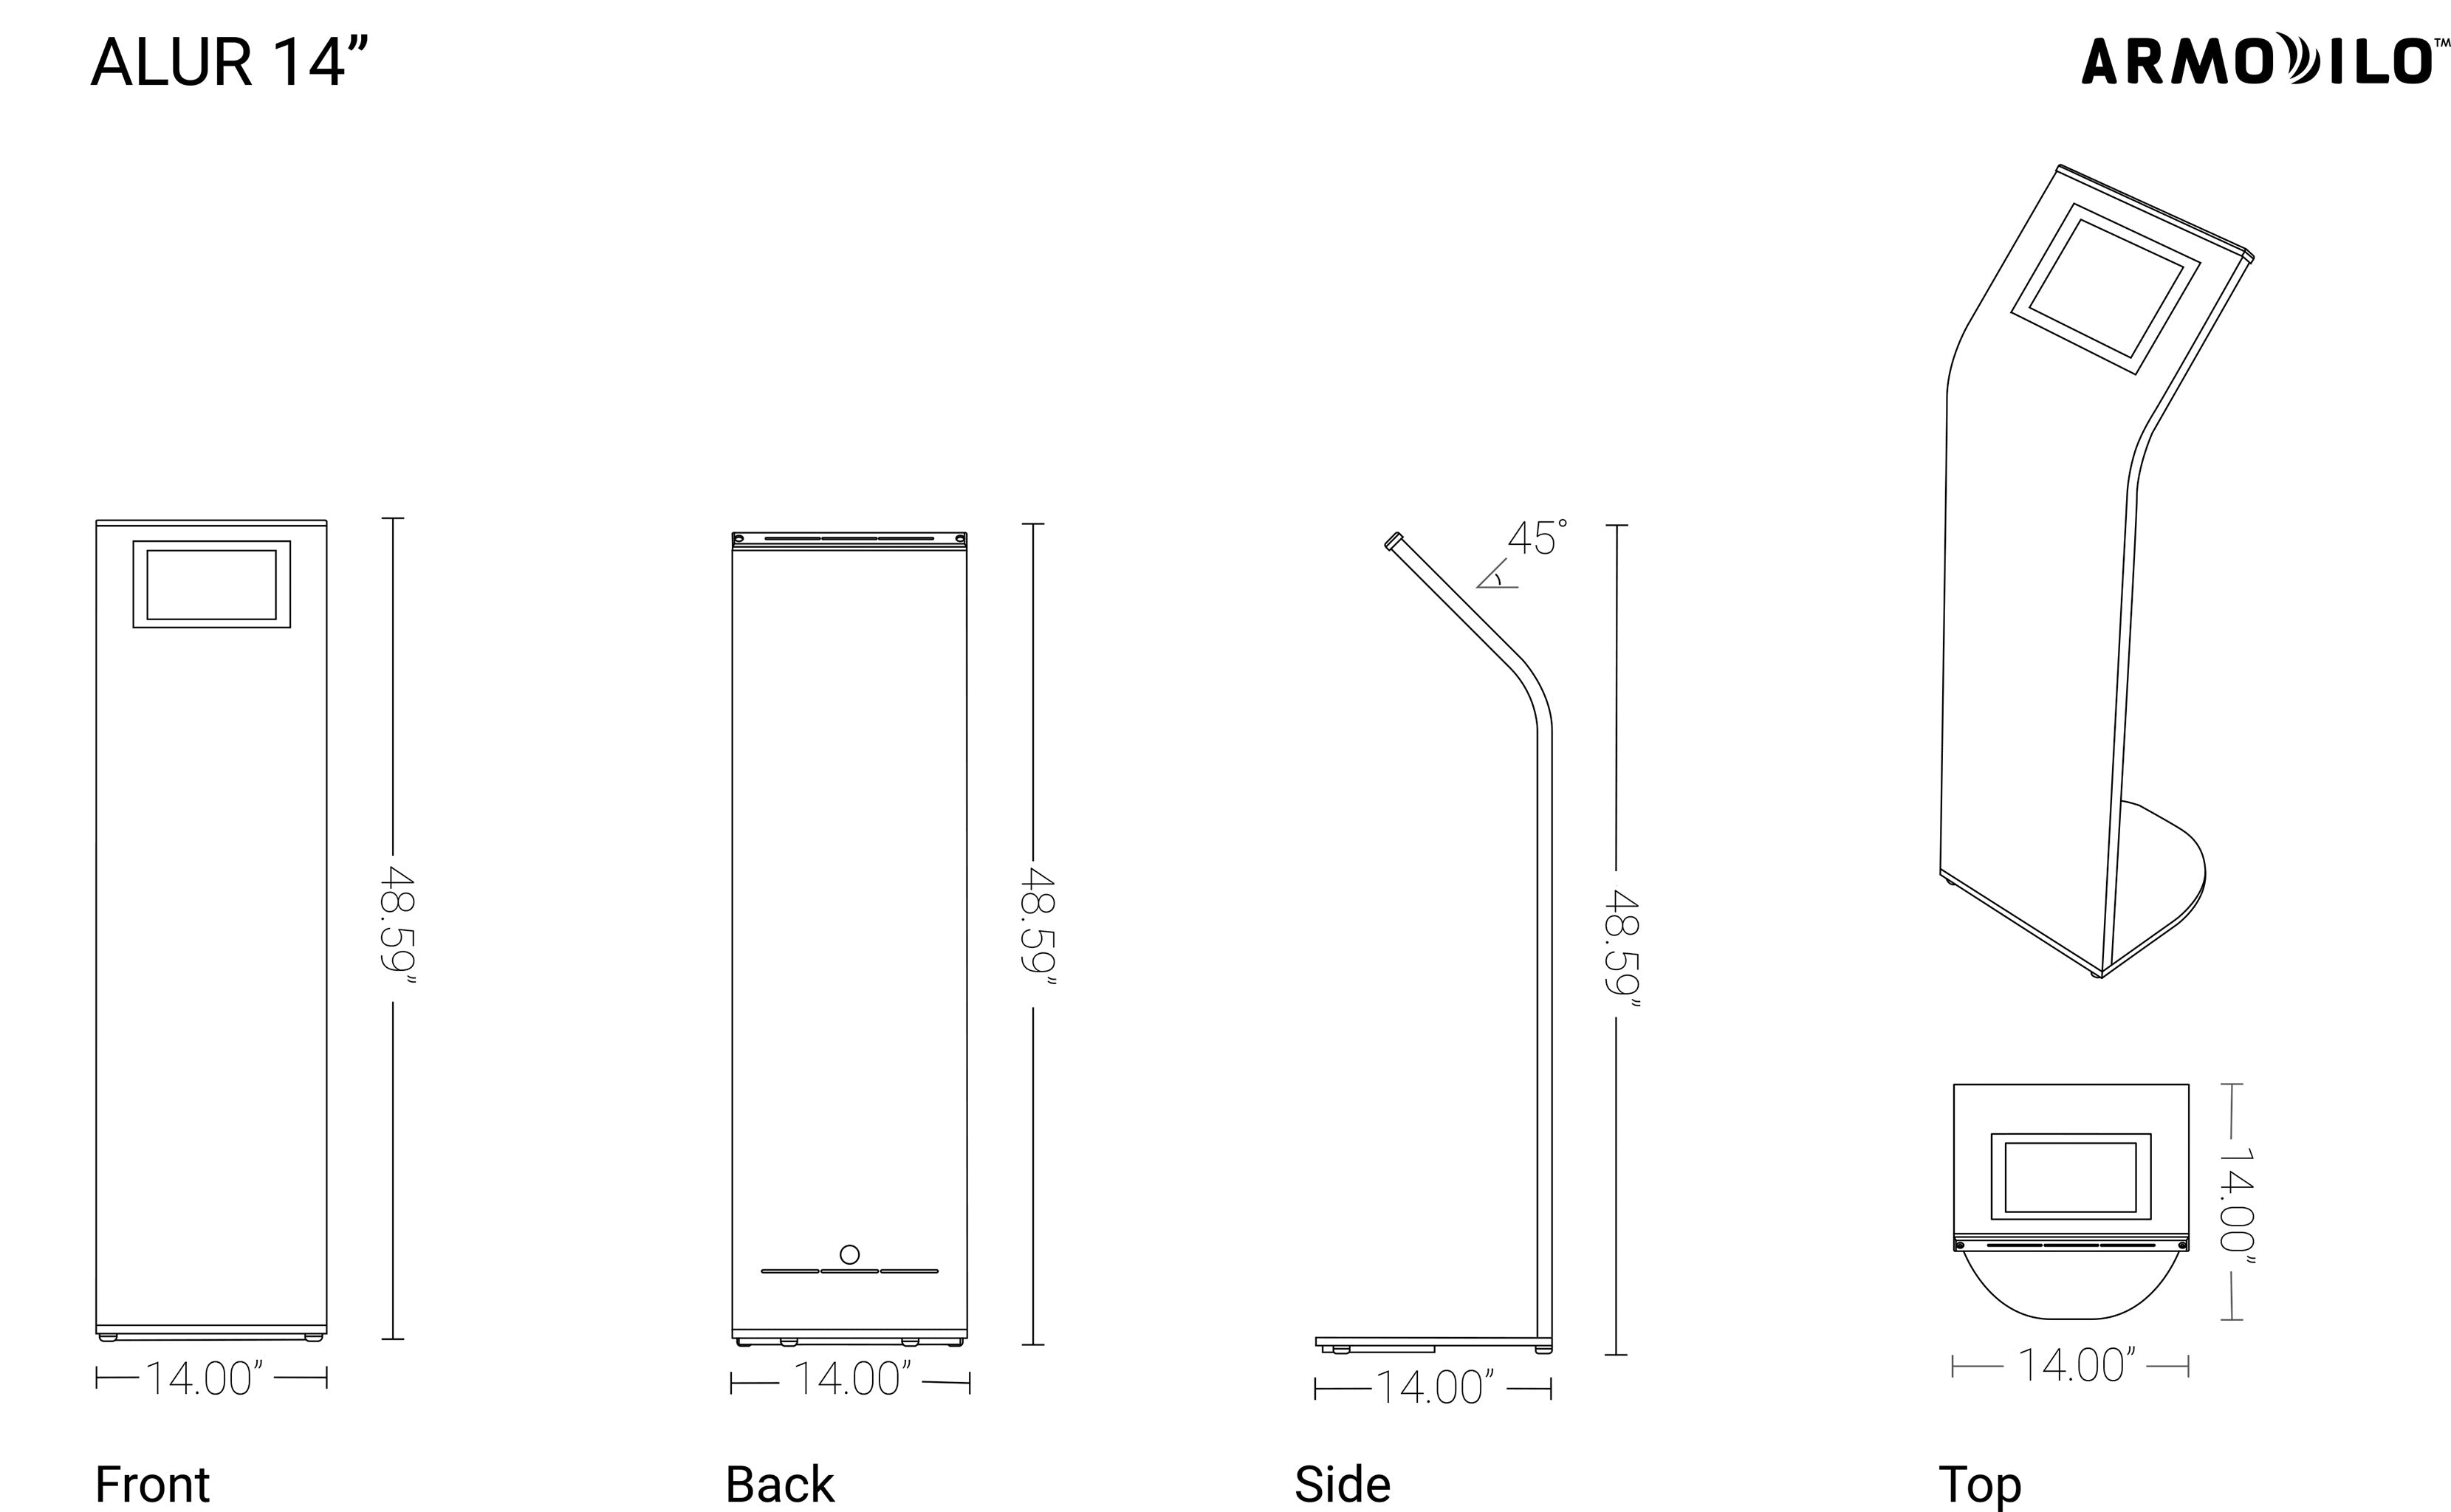 Measurements of the Alur kiosk stand displaying front, back, side, and top in 14"x 48.59".